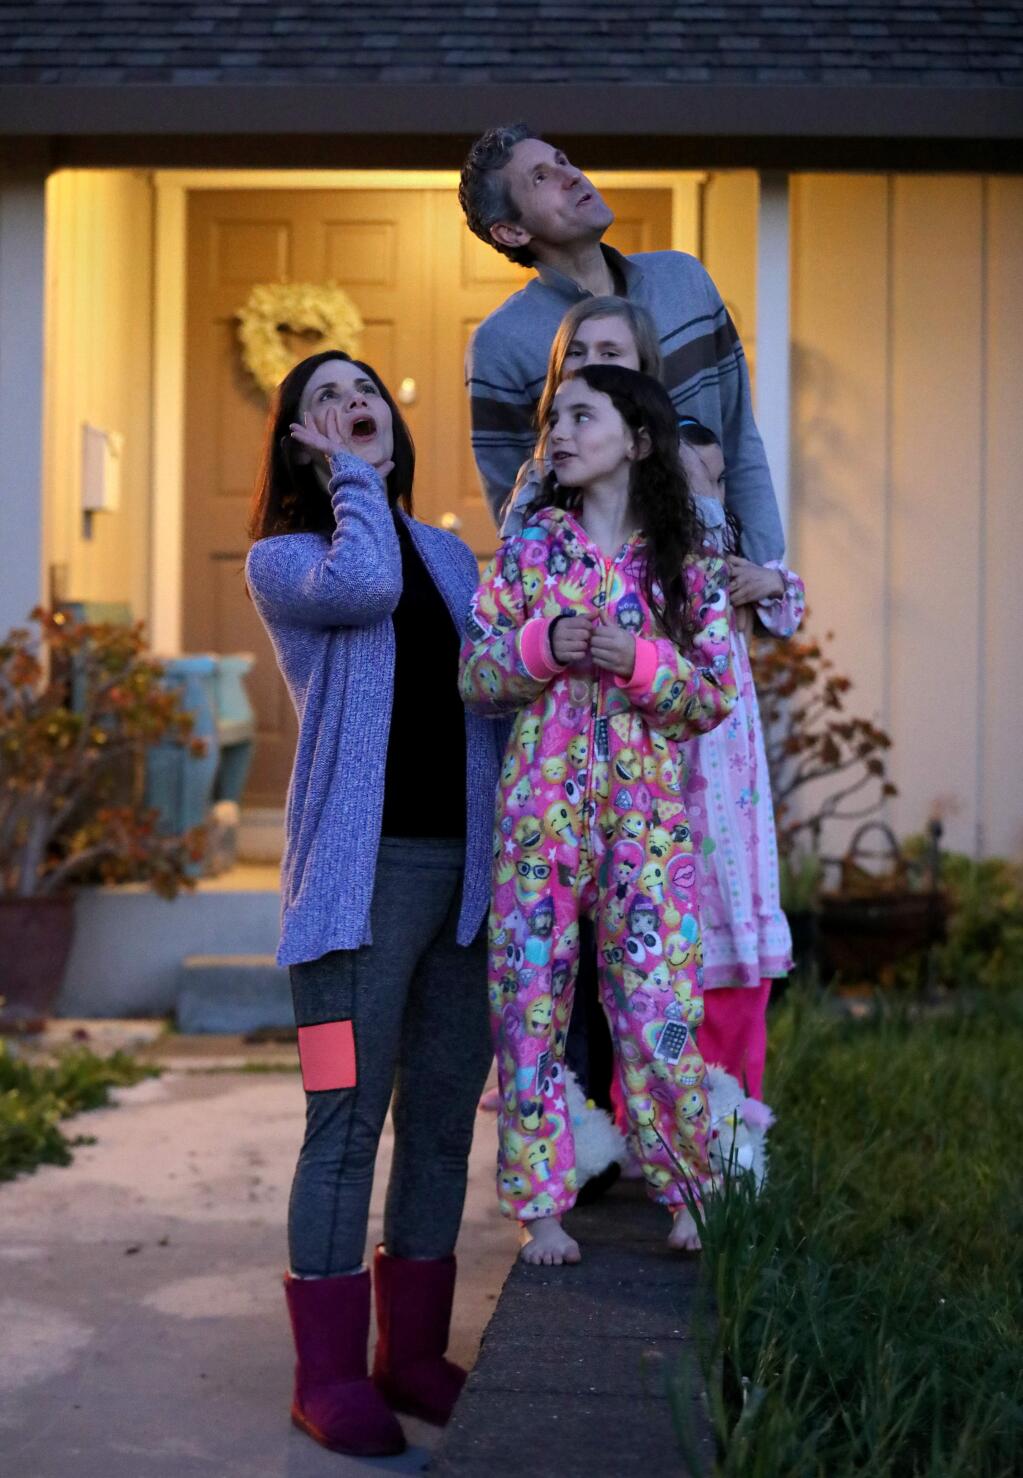 Noelle Mullen, her daughters Tatum, 8, front, Willow, 11, and Fallon, 8, (not seen) and her husband, Dan, join with neighbors and howl outside their home at 8pm in Petaluma on Tuesday, April 7, 2020. (BETH SCHLANKER/ The Press Democrat)